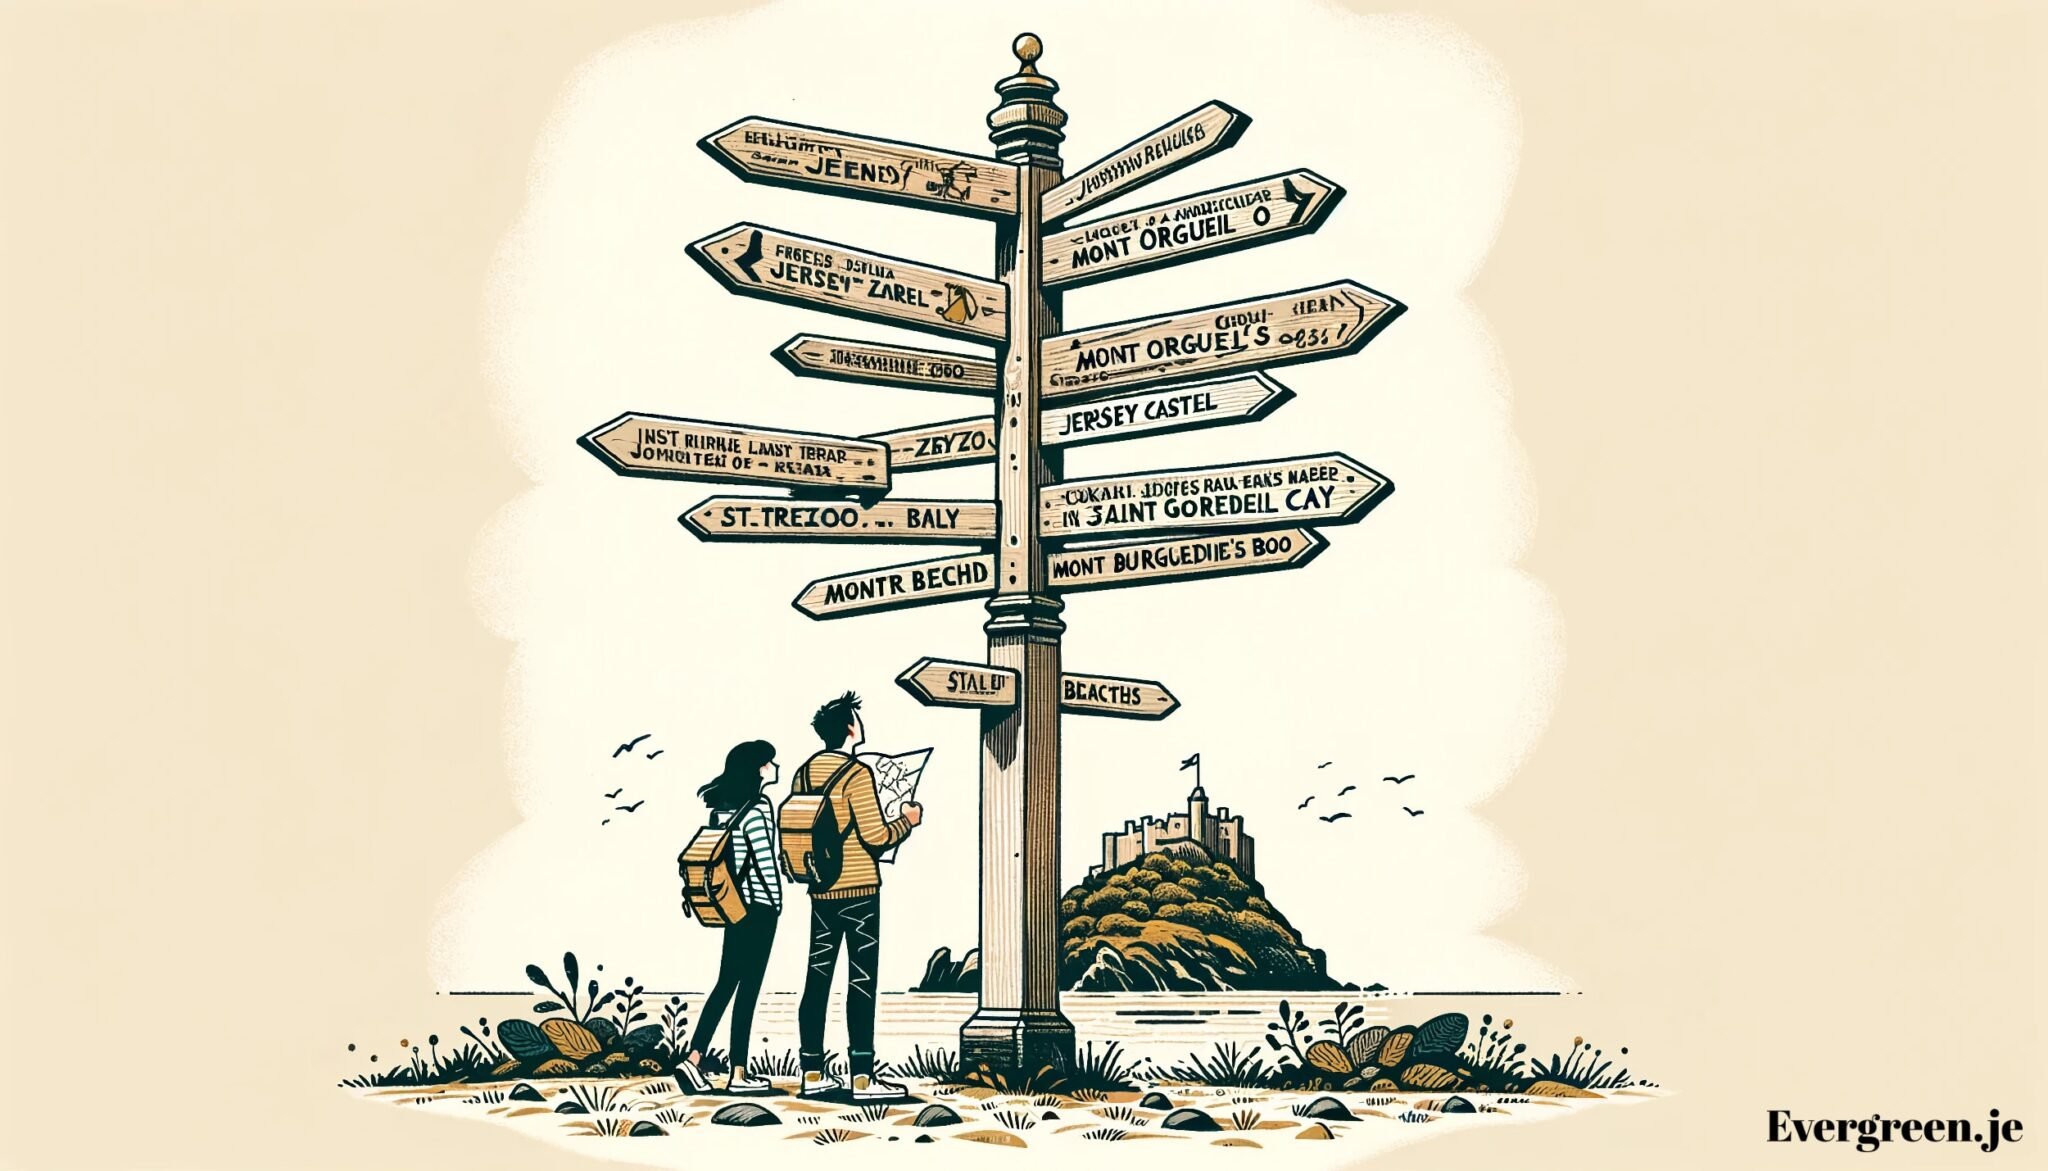 Content marketing strategy search engine optimisation SEO - illustration of two people standing at a signpost pointing to many different Jersey destinations Evergreen Je